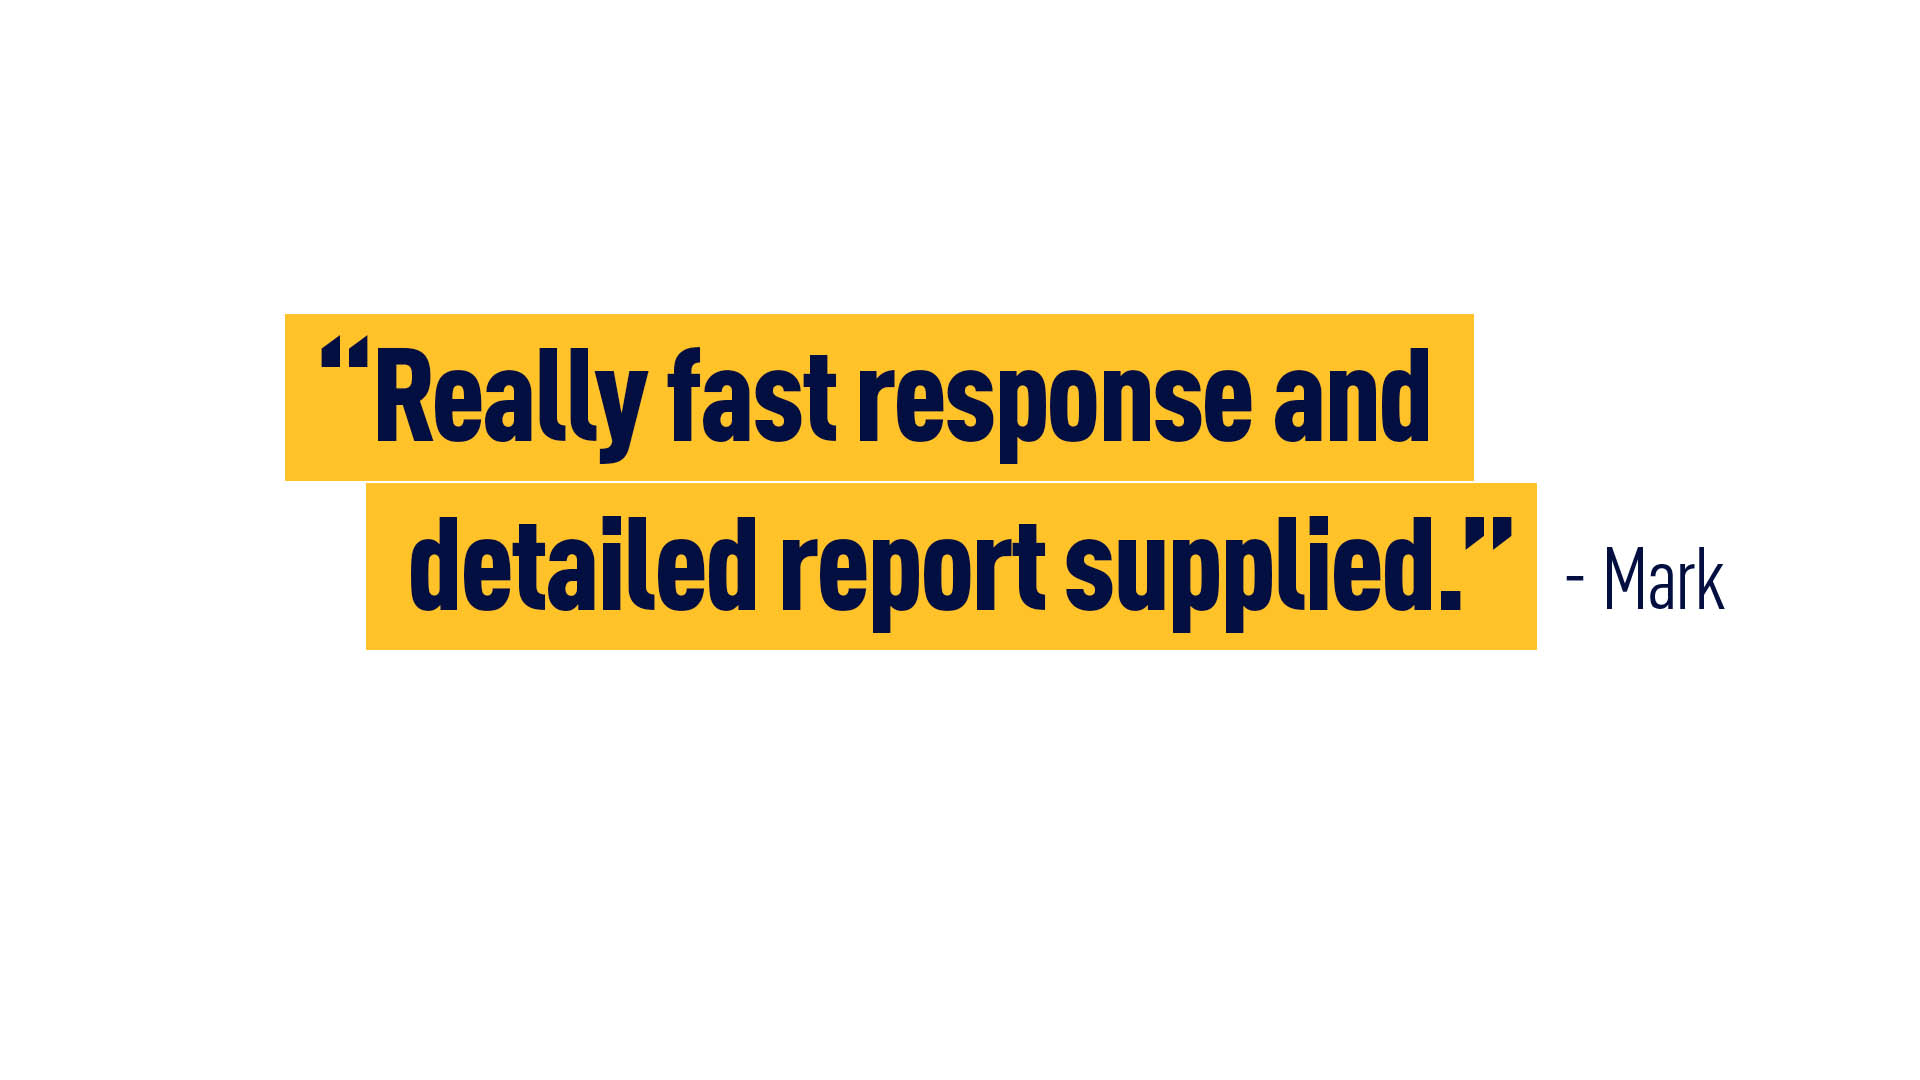 “Really fast response and detailed report supplied.” - Mark